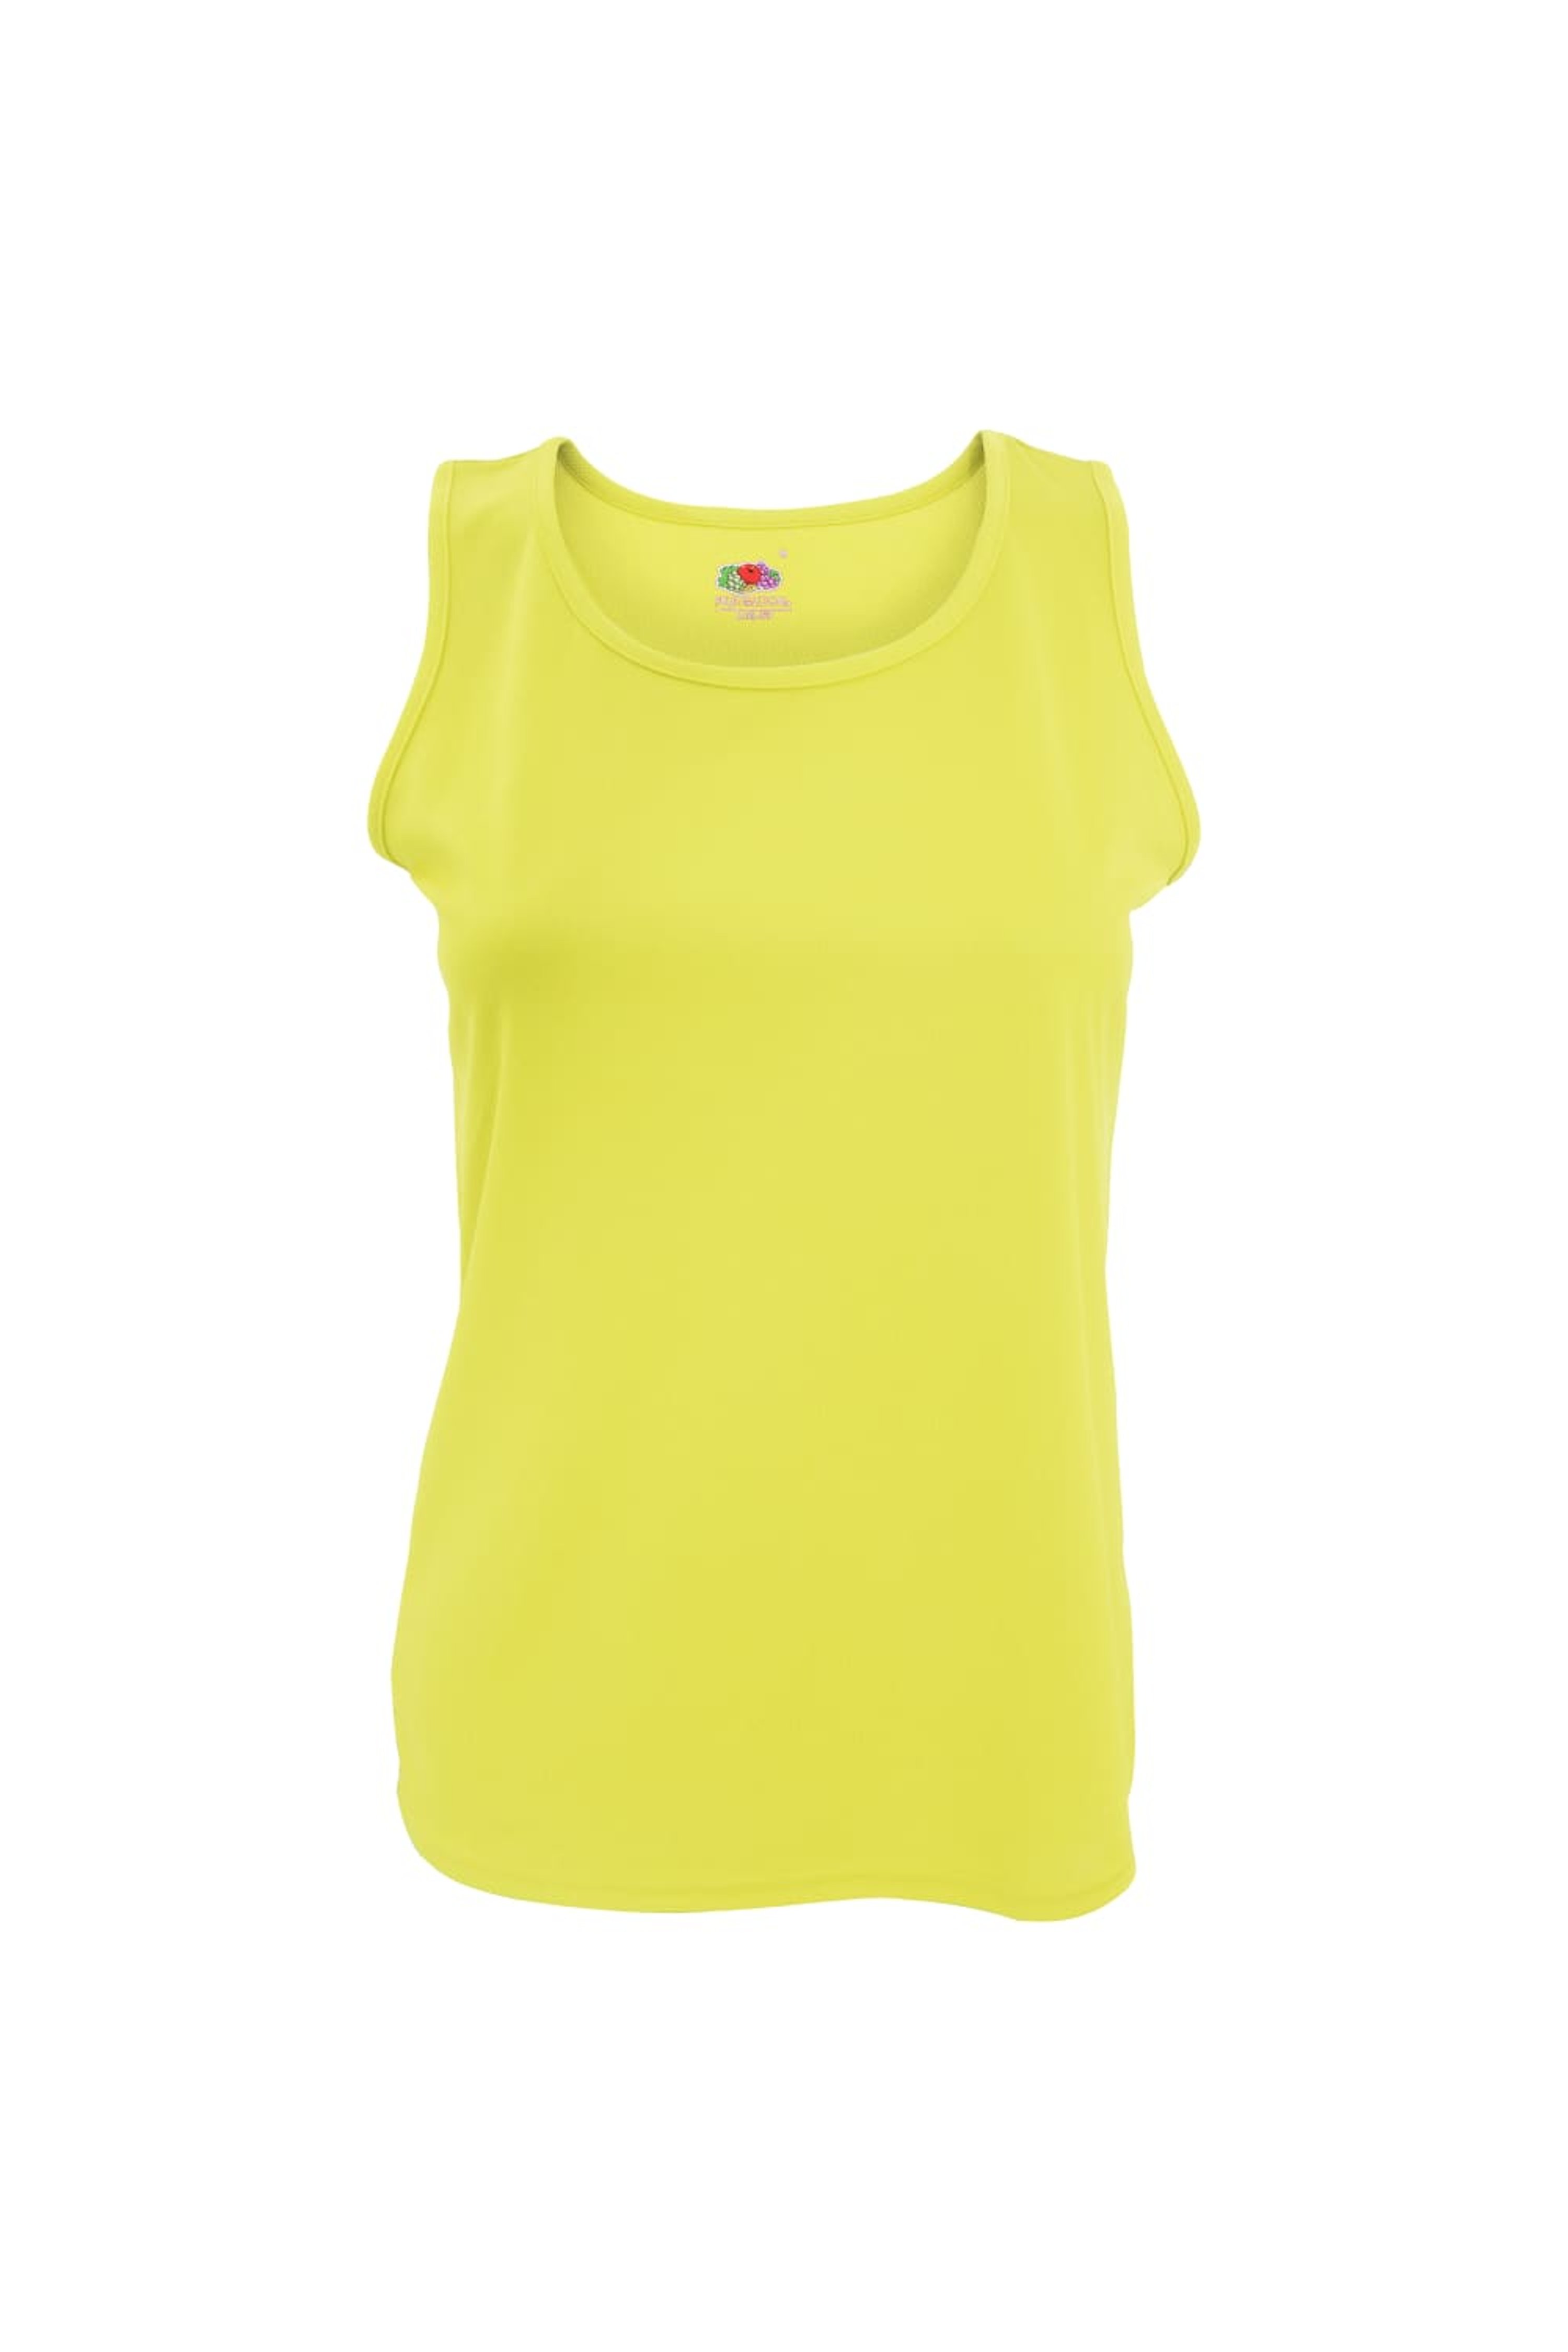 FRUIT OF THE LOOM FRUIT OF THE LOOM WOMENS/LADIES SLEEVELESS LADY-FIT PERFORMANCE VEST TOP